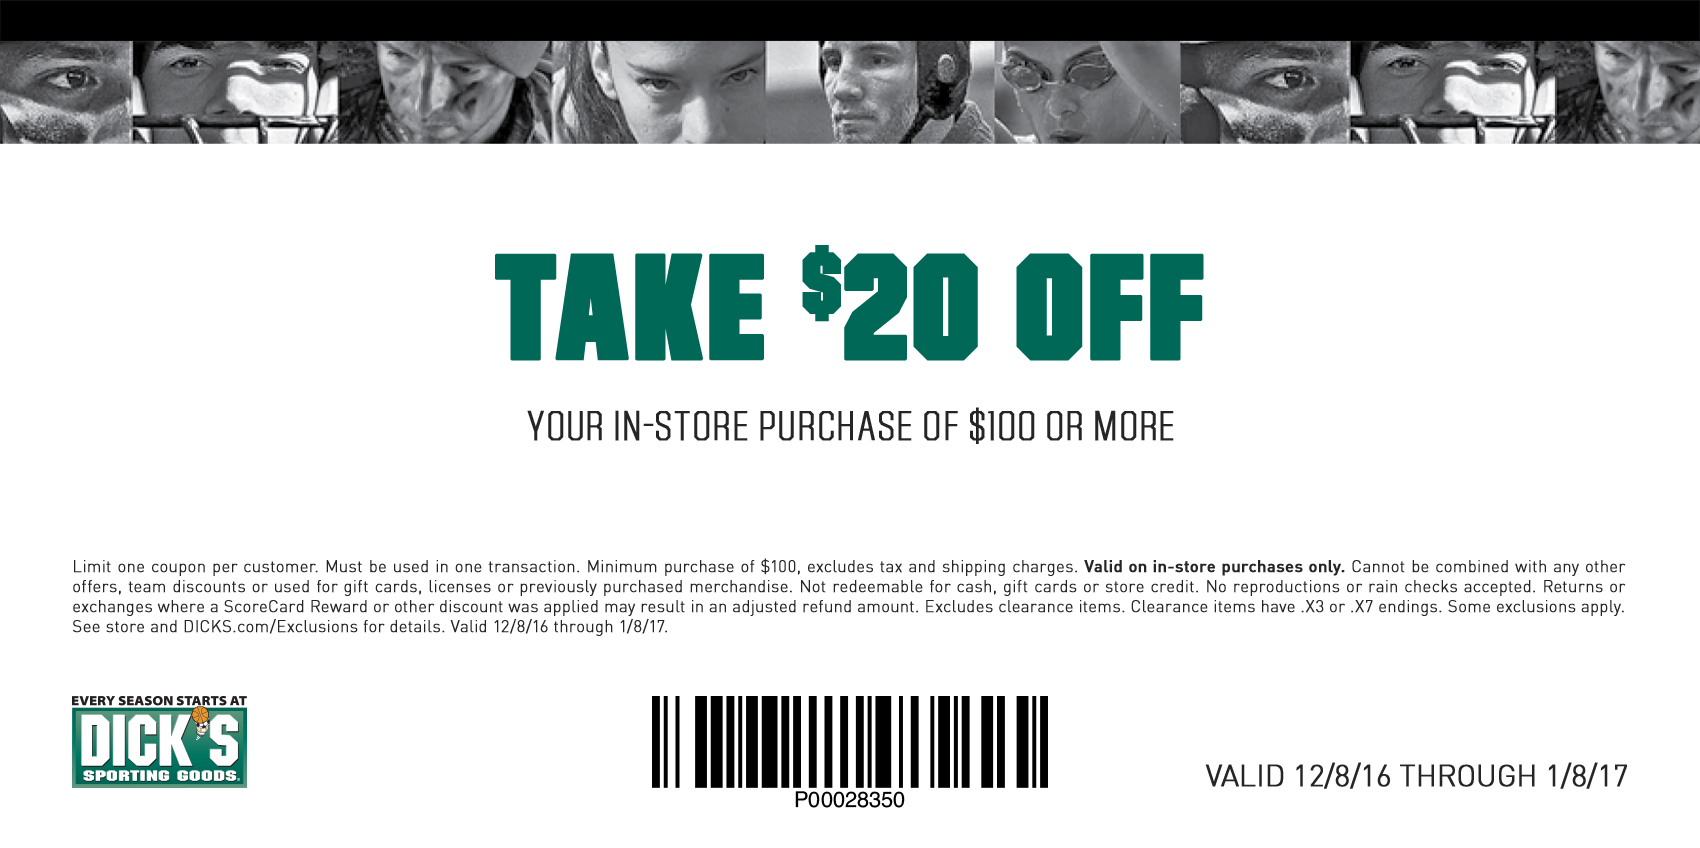 Limit one coupon per customer. Must be used in one transaction. Minimum purchase of $100, excludes tax and shipping charges. Valid on in-store purchases only. Cannot be combined with any other offers, team discounts or used for gift cards, licenses or previously purchased merchandise. Not redeemable for cash, gift cards or store credit. No reproductions or rain checks accepted. Returns or exchanges where a ScoreCard Reward or other discount was applied may result in an adjusted refund amount. Excludes clearance items. Clearance items have .X3 or .X7 endings. Some exclusions apply.  See store and DICKS.com/Exclusions for details. Valid 12/8/16 through 1/8/17.